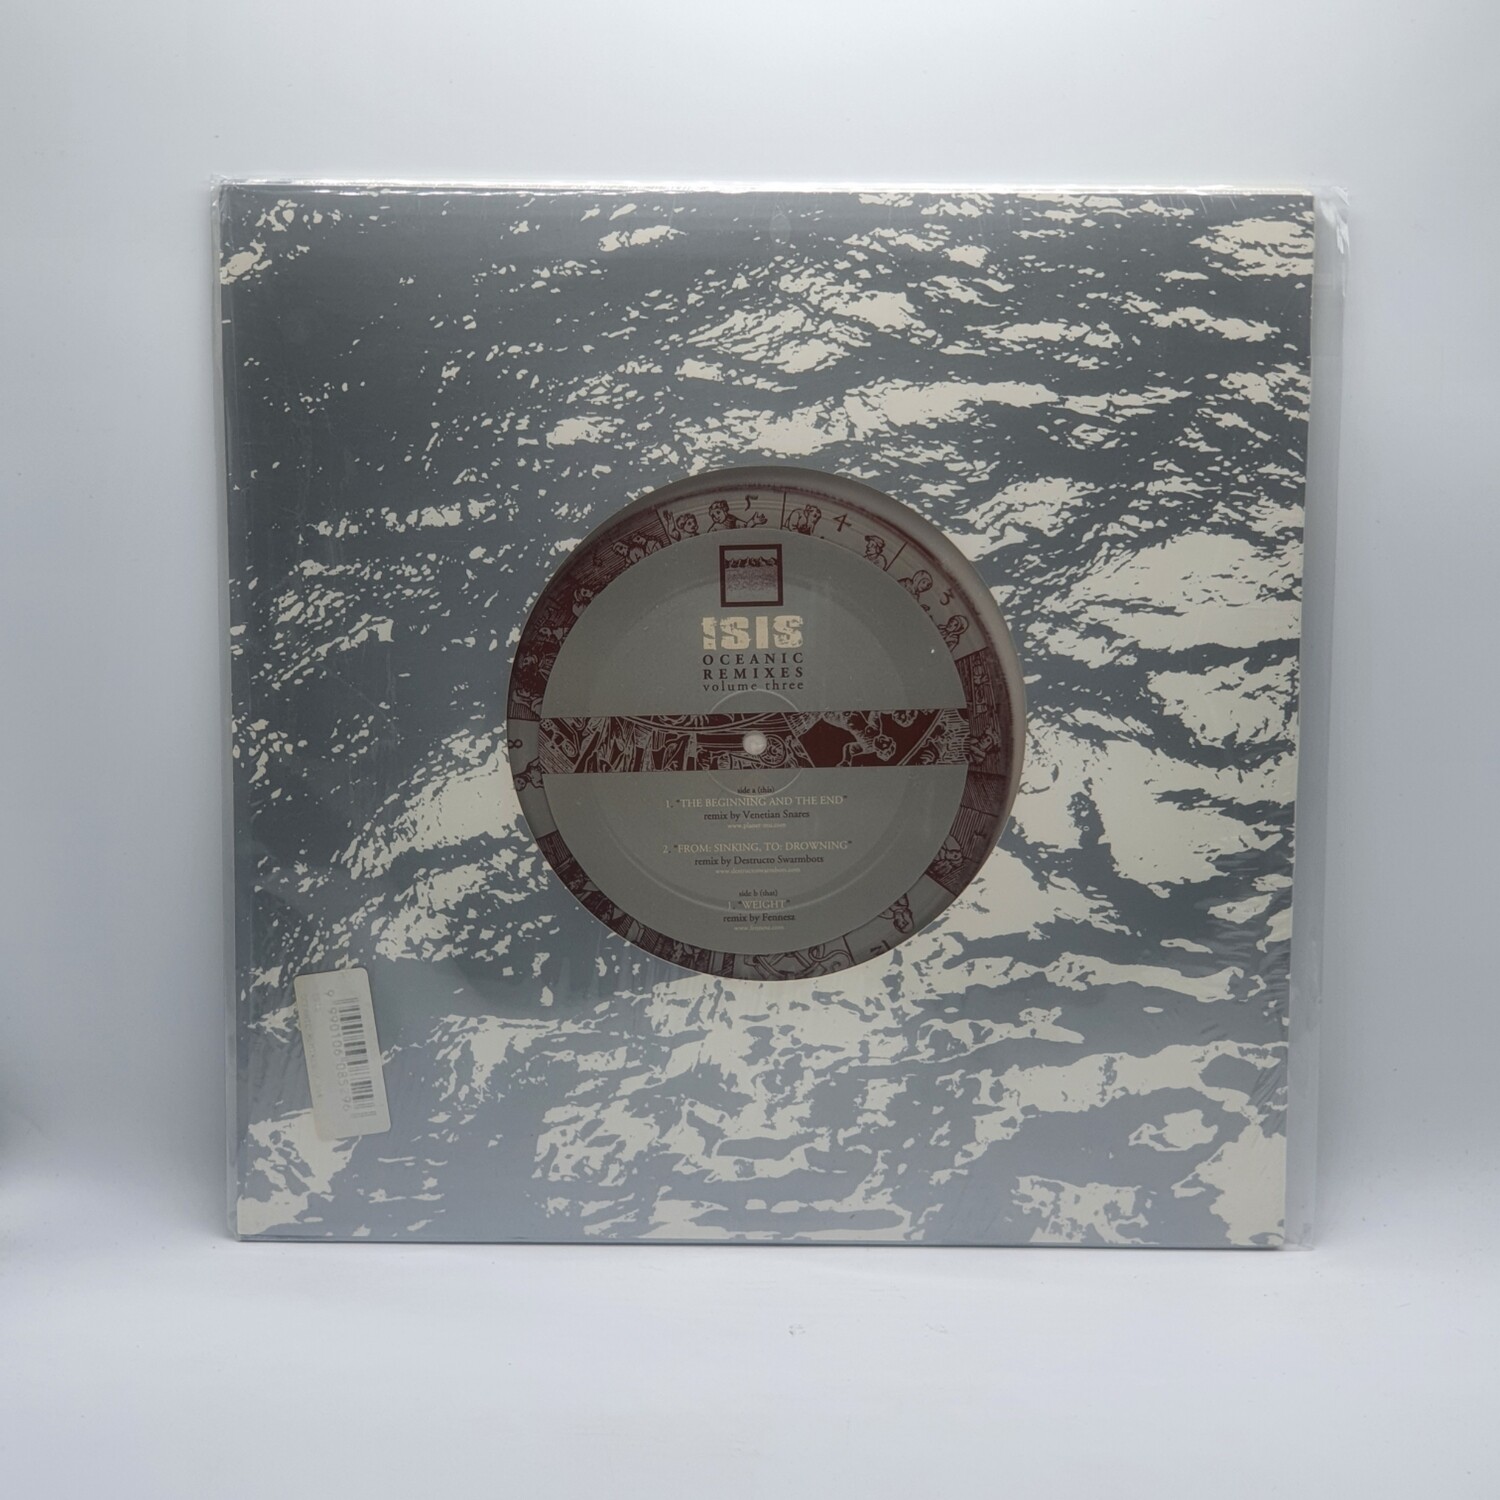 [USED] ISIS -OCEANIC REMIXES VOLUME THREE- 12 INCH EP (CLEAR VINYL)